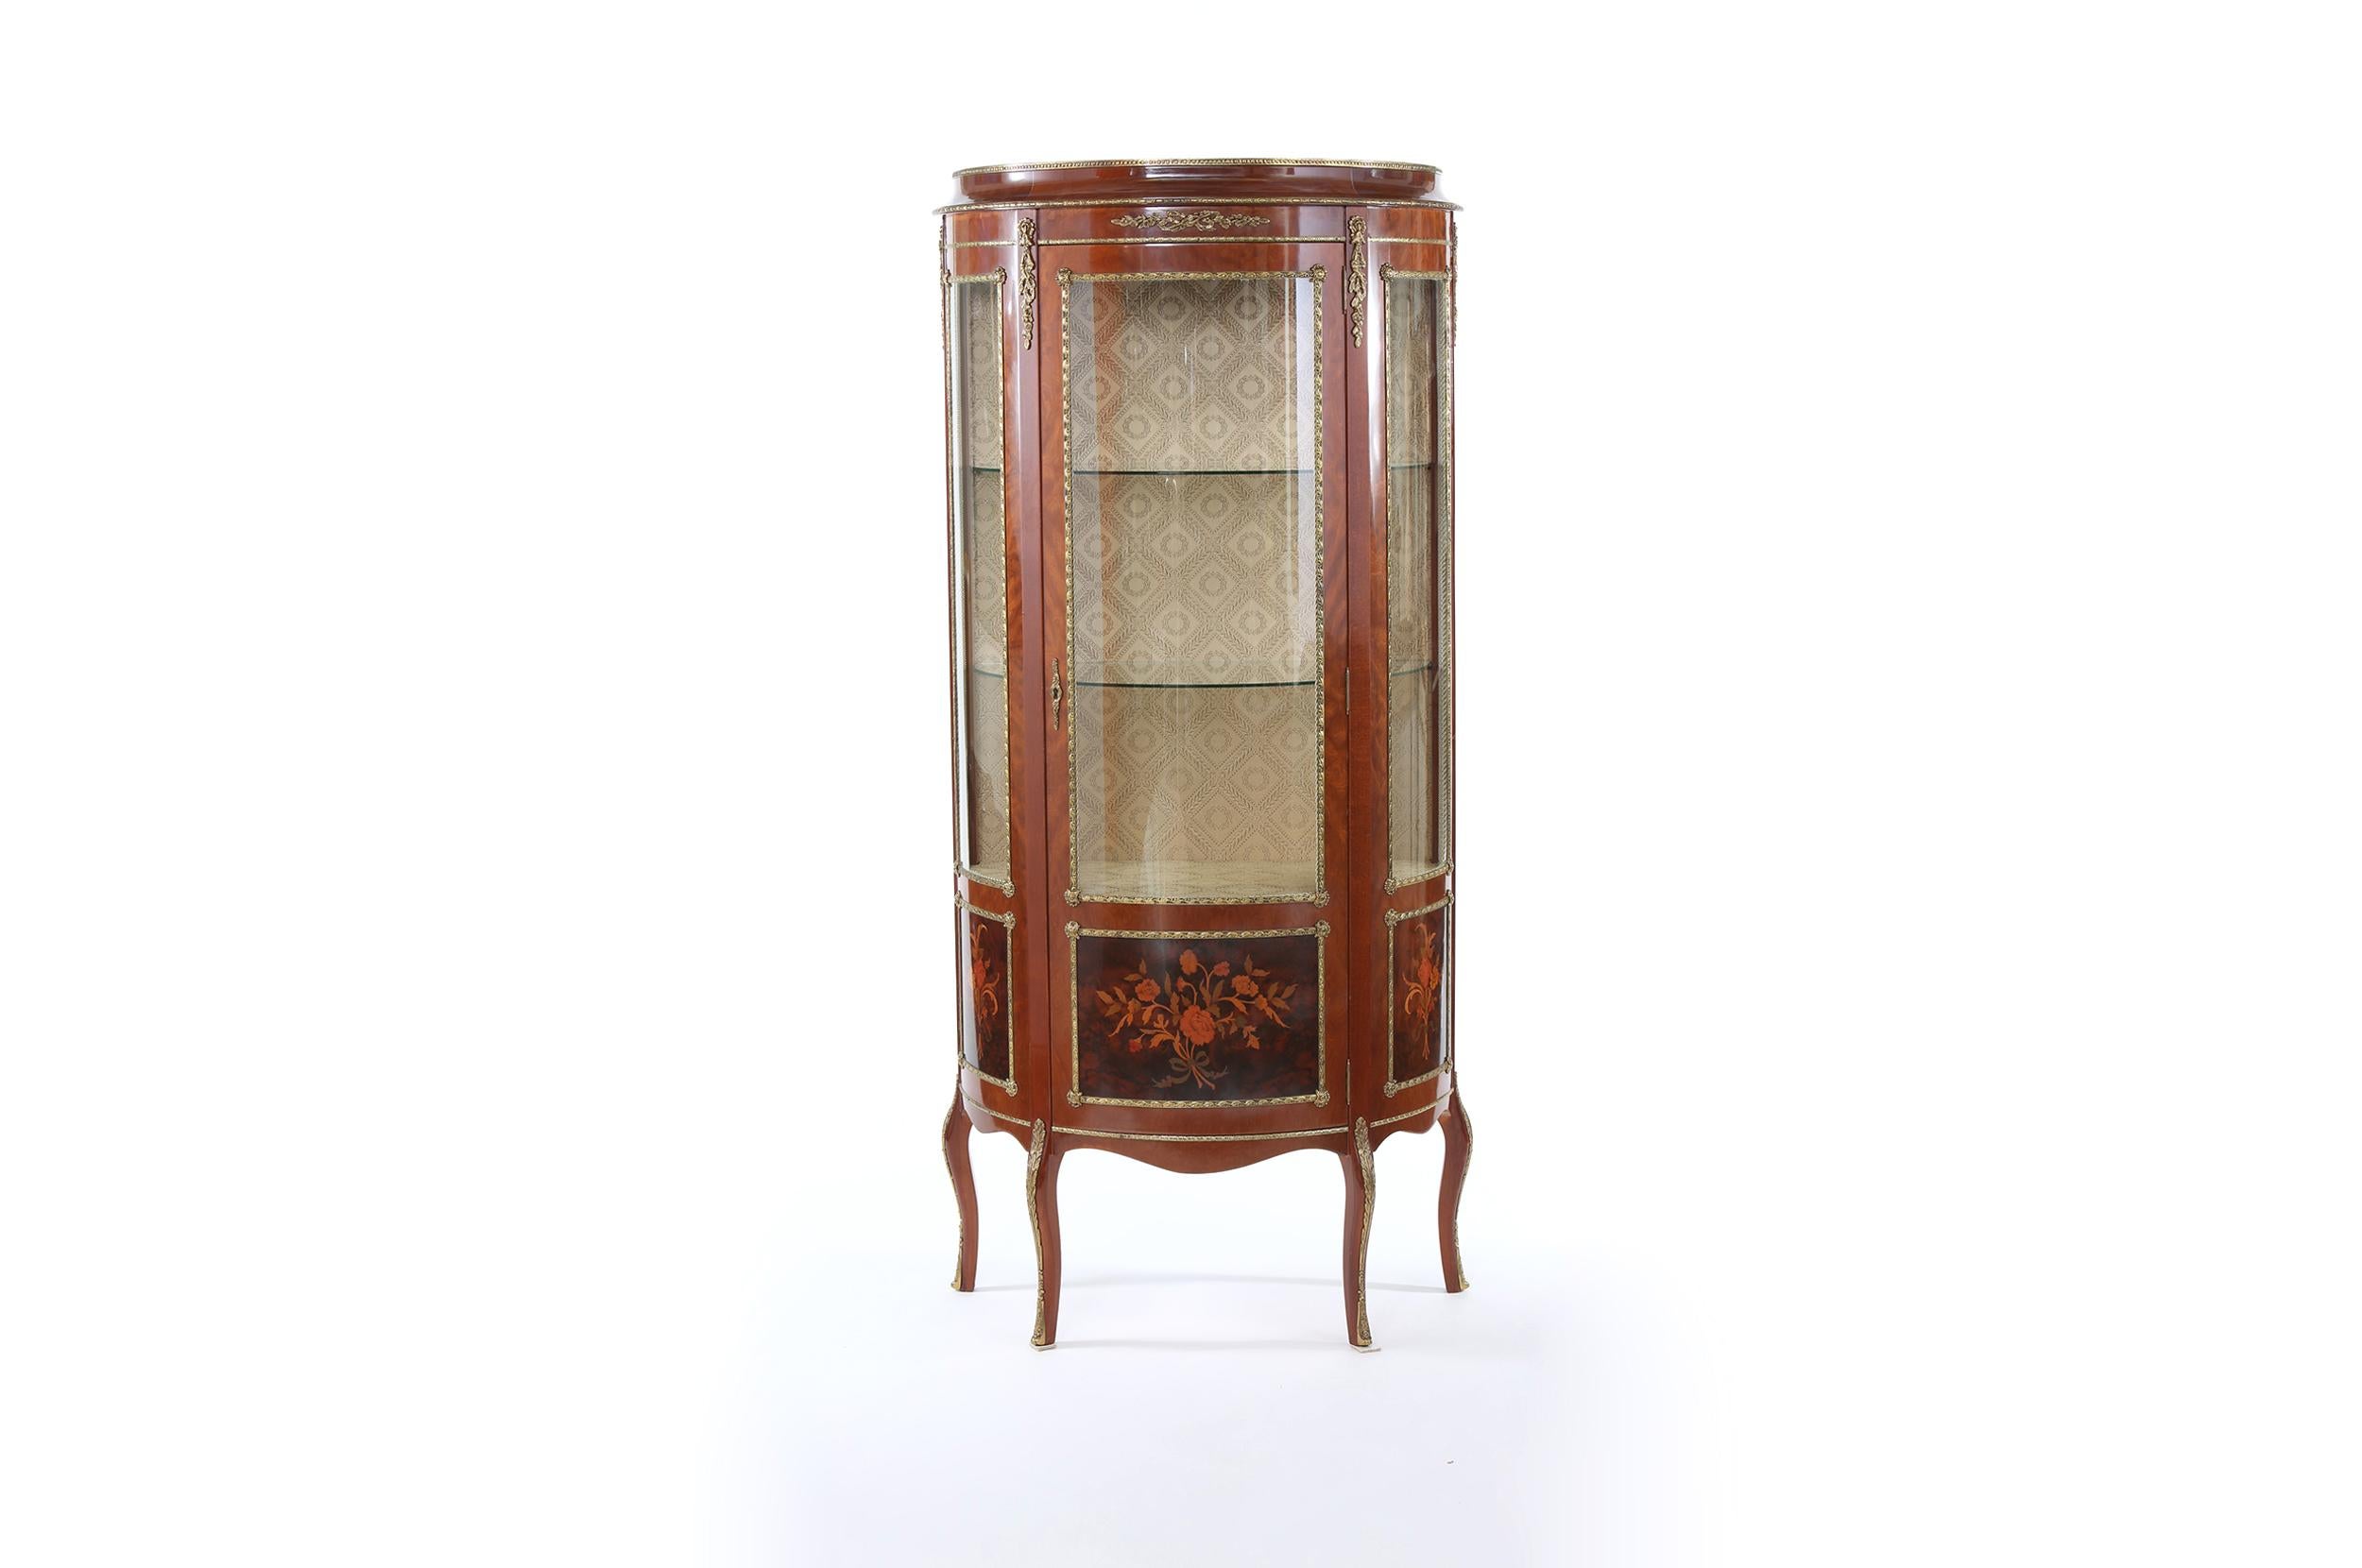 Louis XV style bronze mounted China display cabinet / Vitrine with exterior inlaid design details. The interior of the cabinet has two glass shelves and lined with gold patterned brocade. The cabinet stands on cabriole legs with Ormolu mounts. The